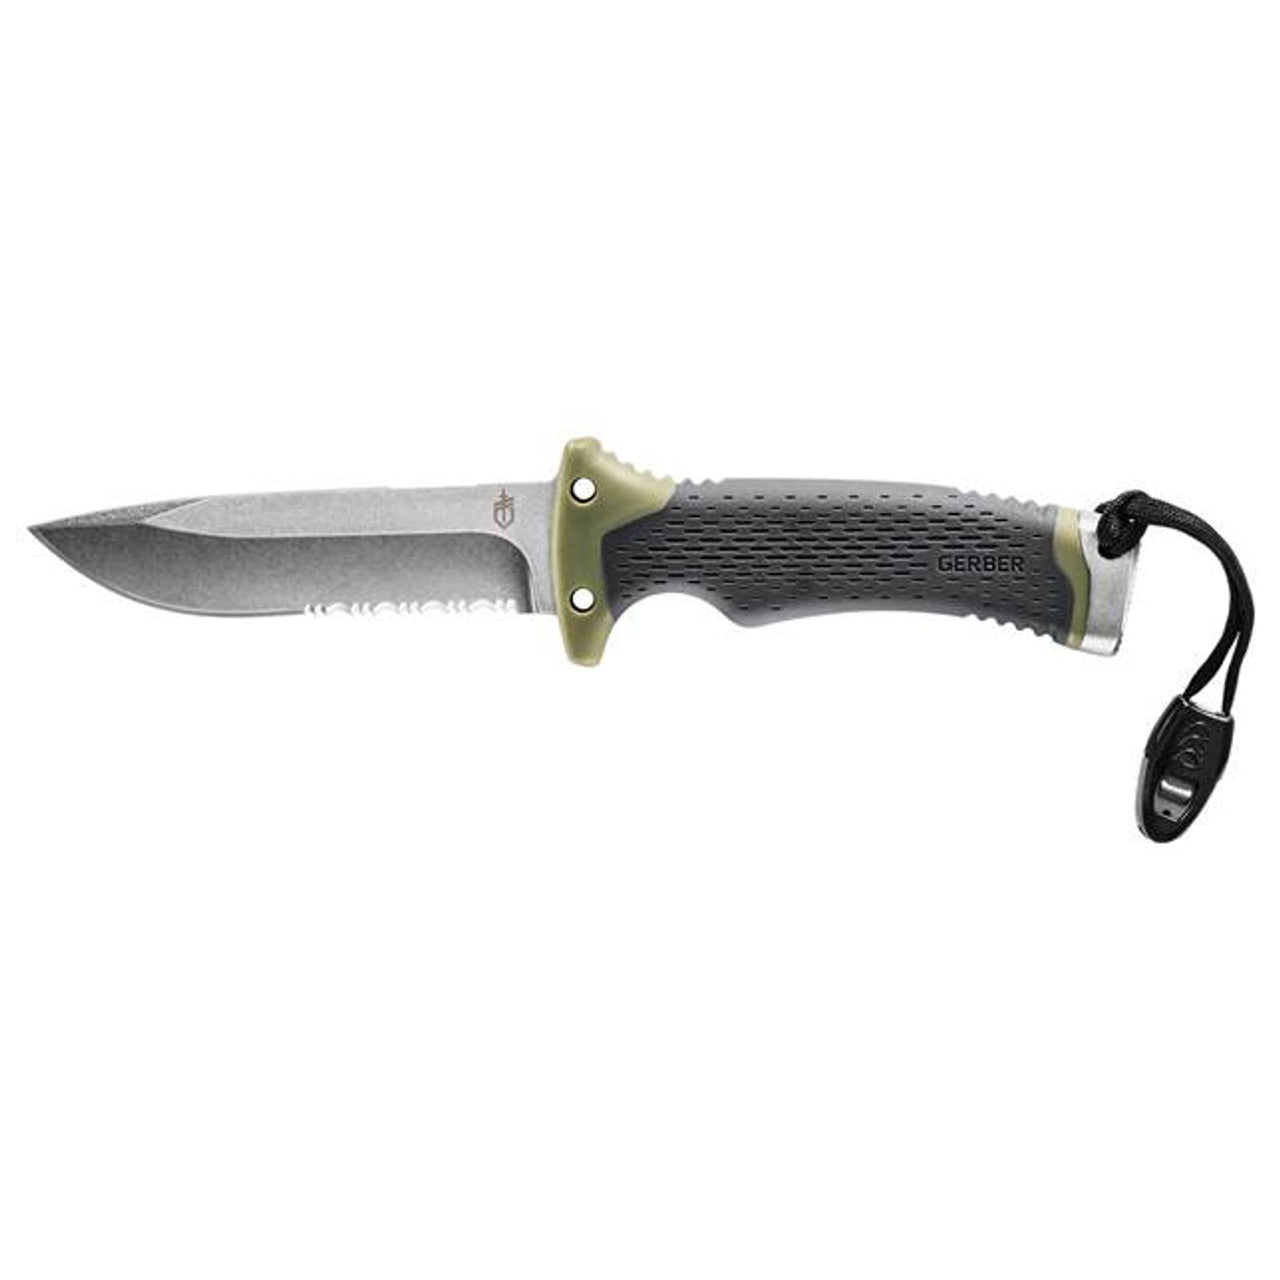 Gerber Serrated Fixed Ultimate Fire Survival Knife GR2600